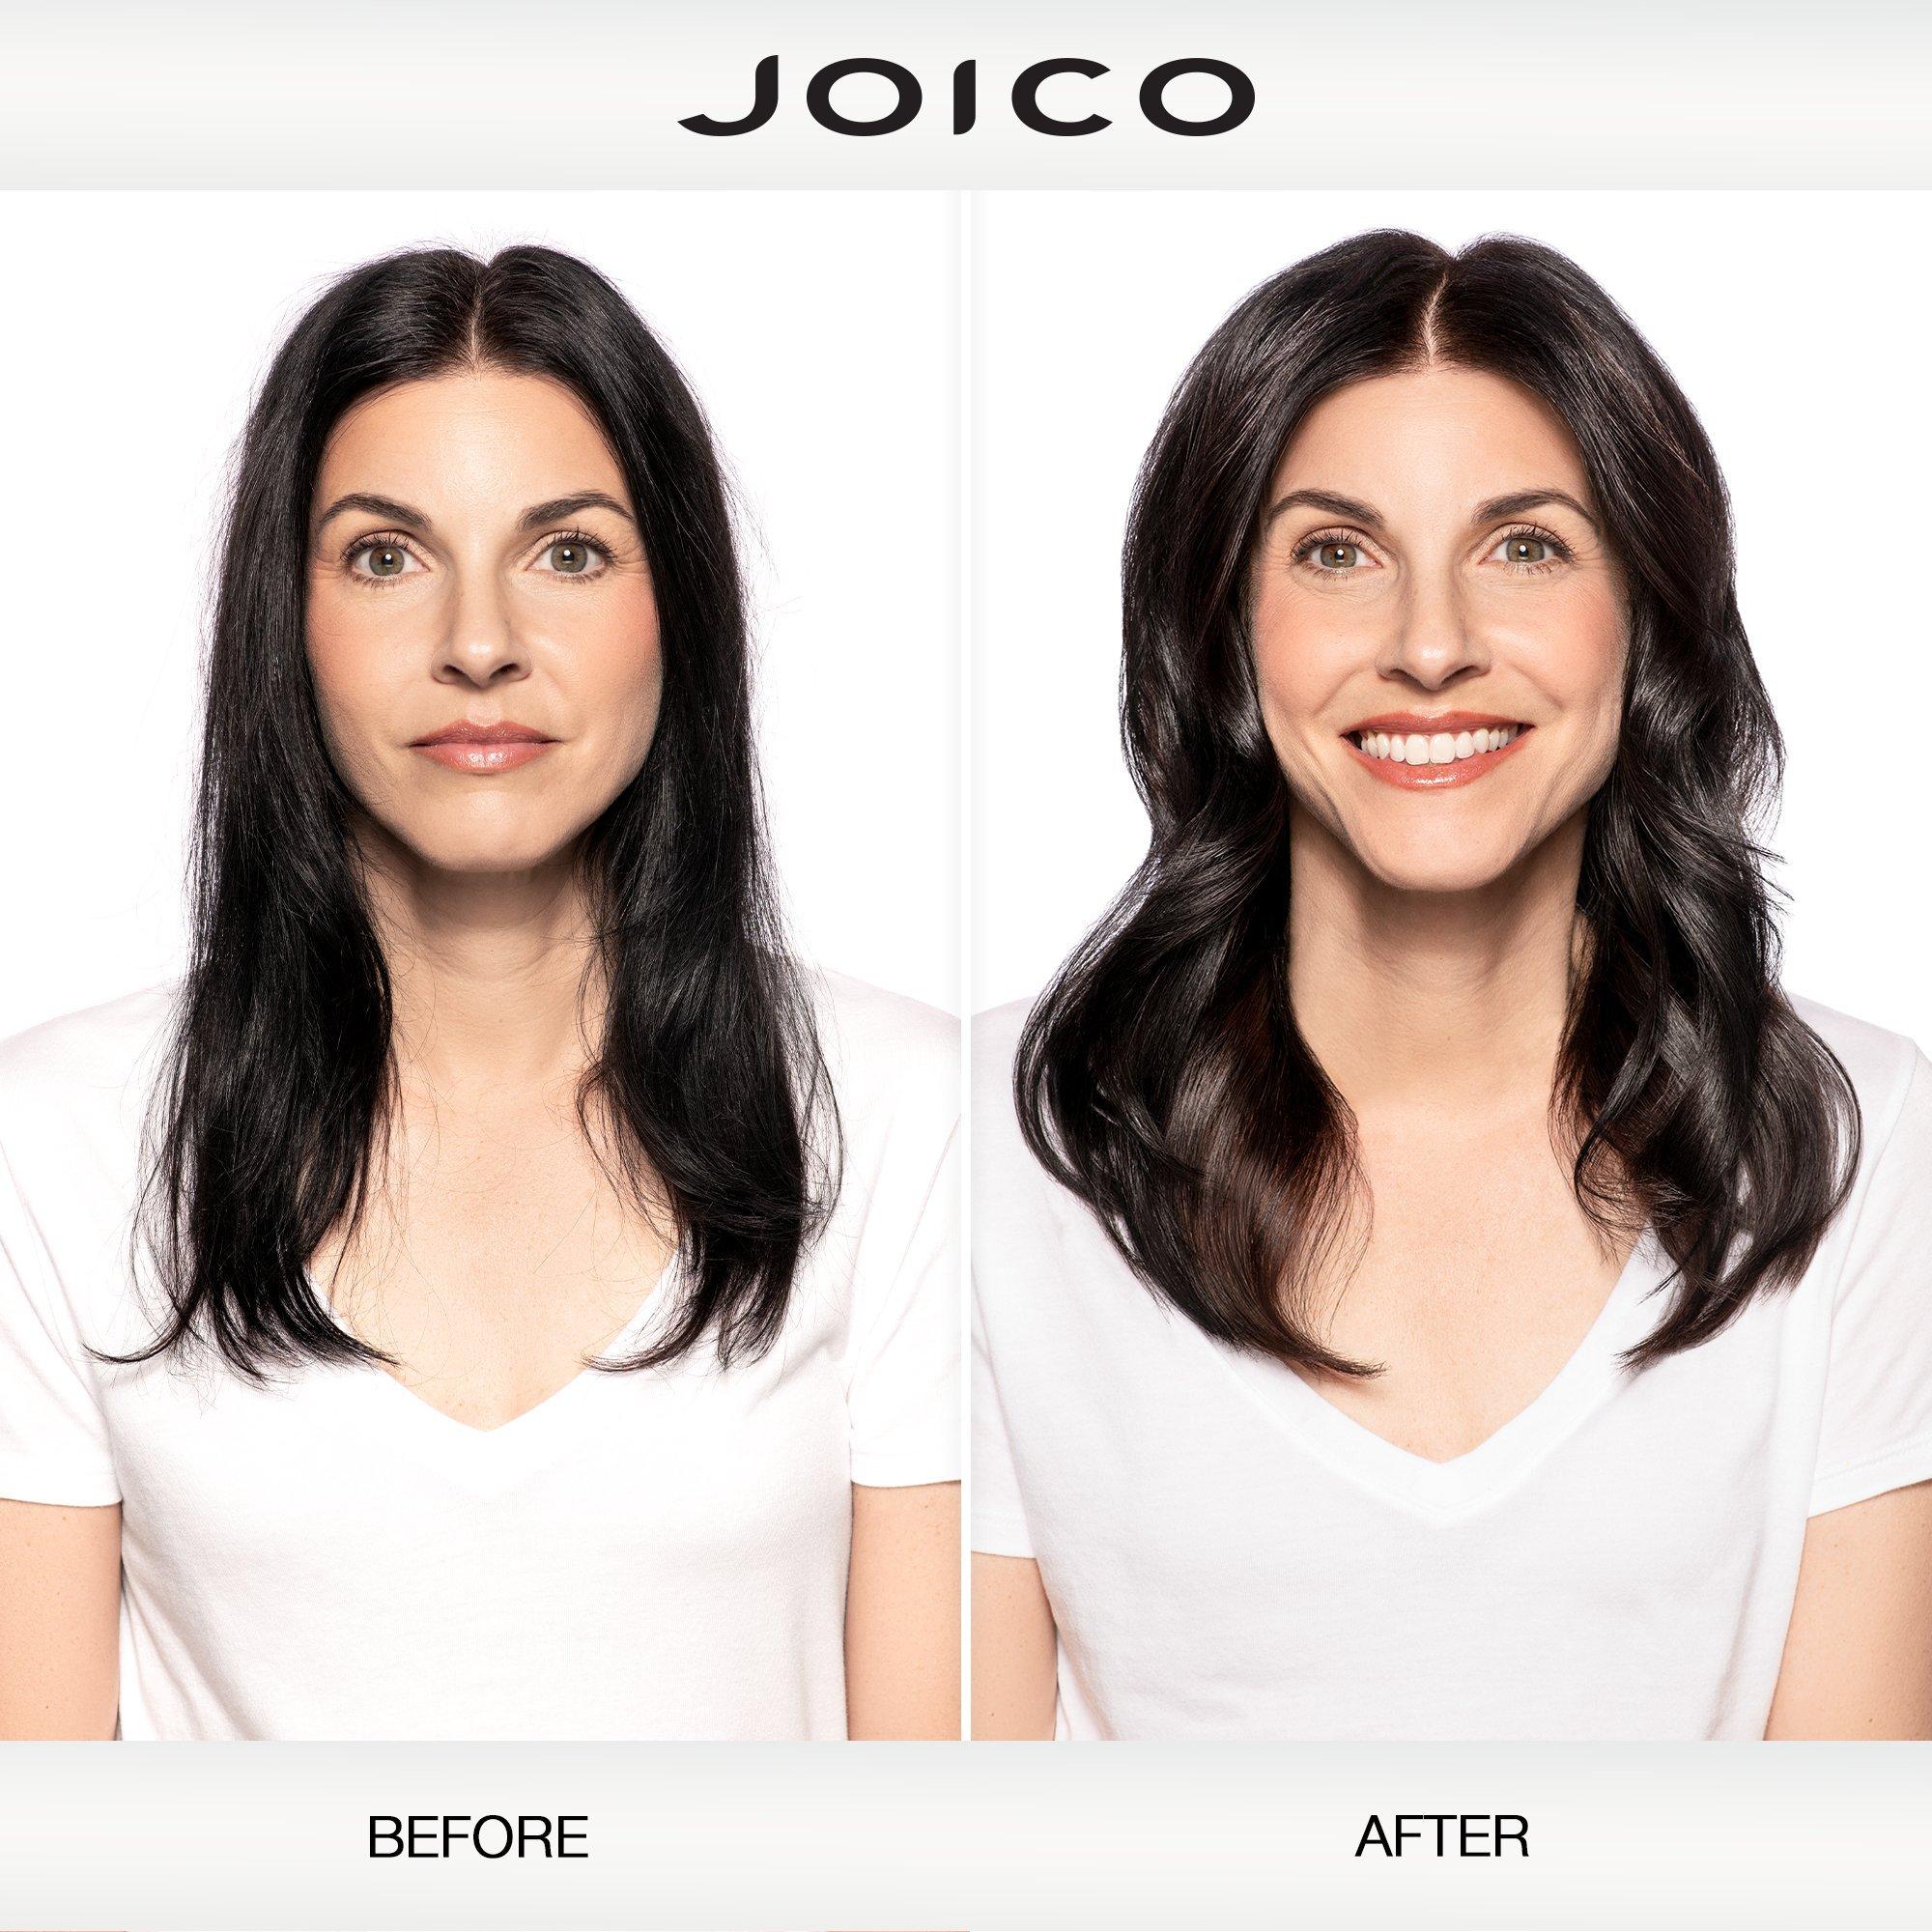 Joico YouthLock Shampoo and Conditioner Formulated With Collagen Liter Duo ($89 Value) / 33.8